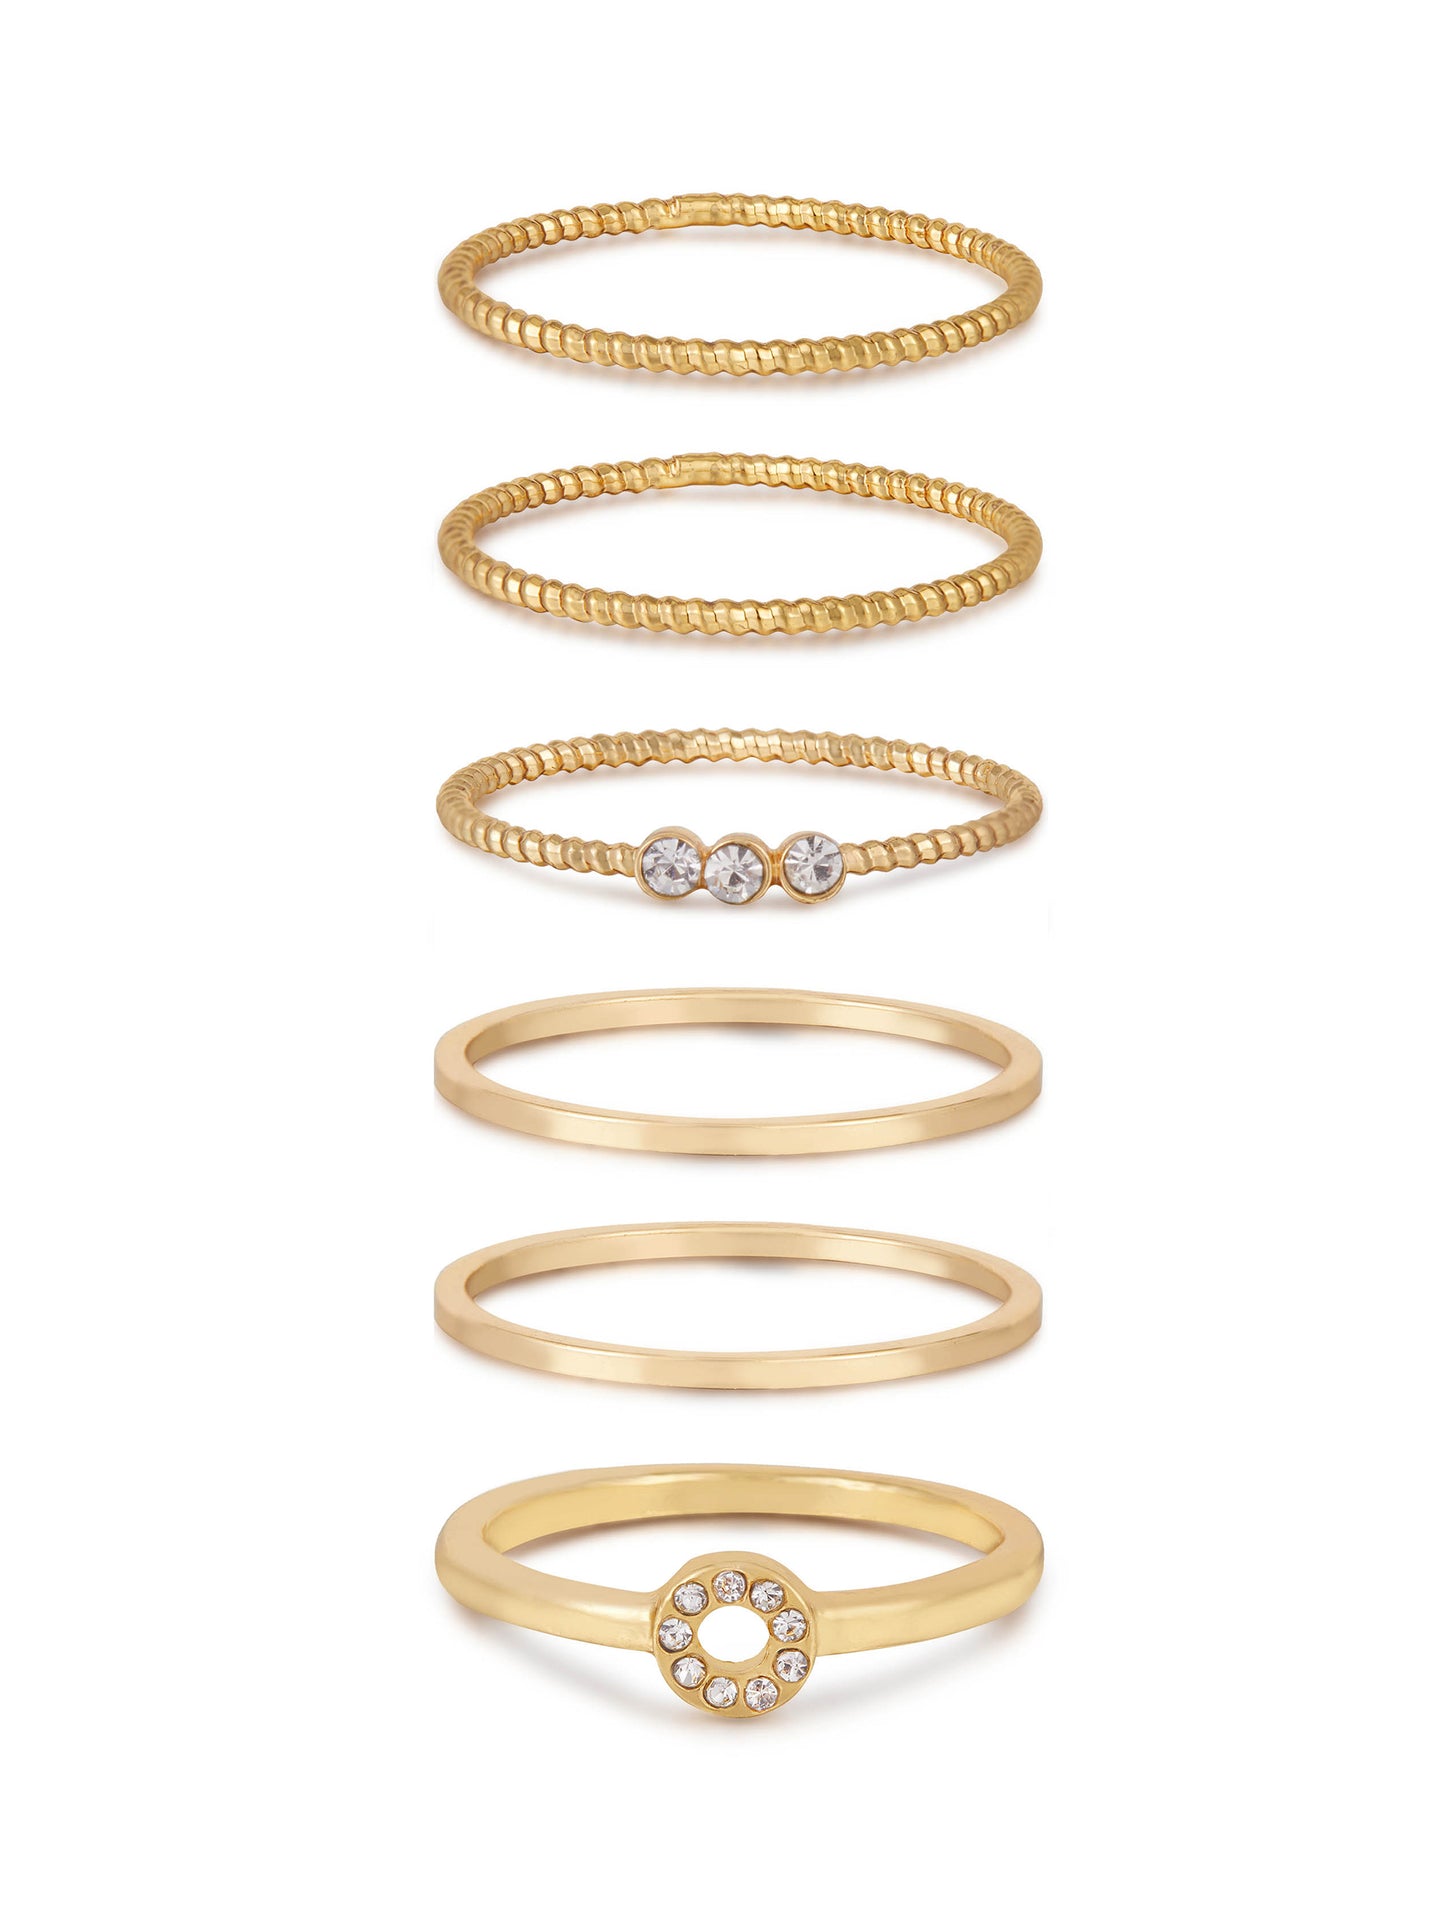 Dainty Stacking Ring Set of 6